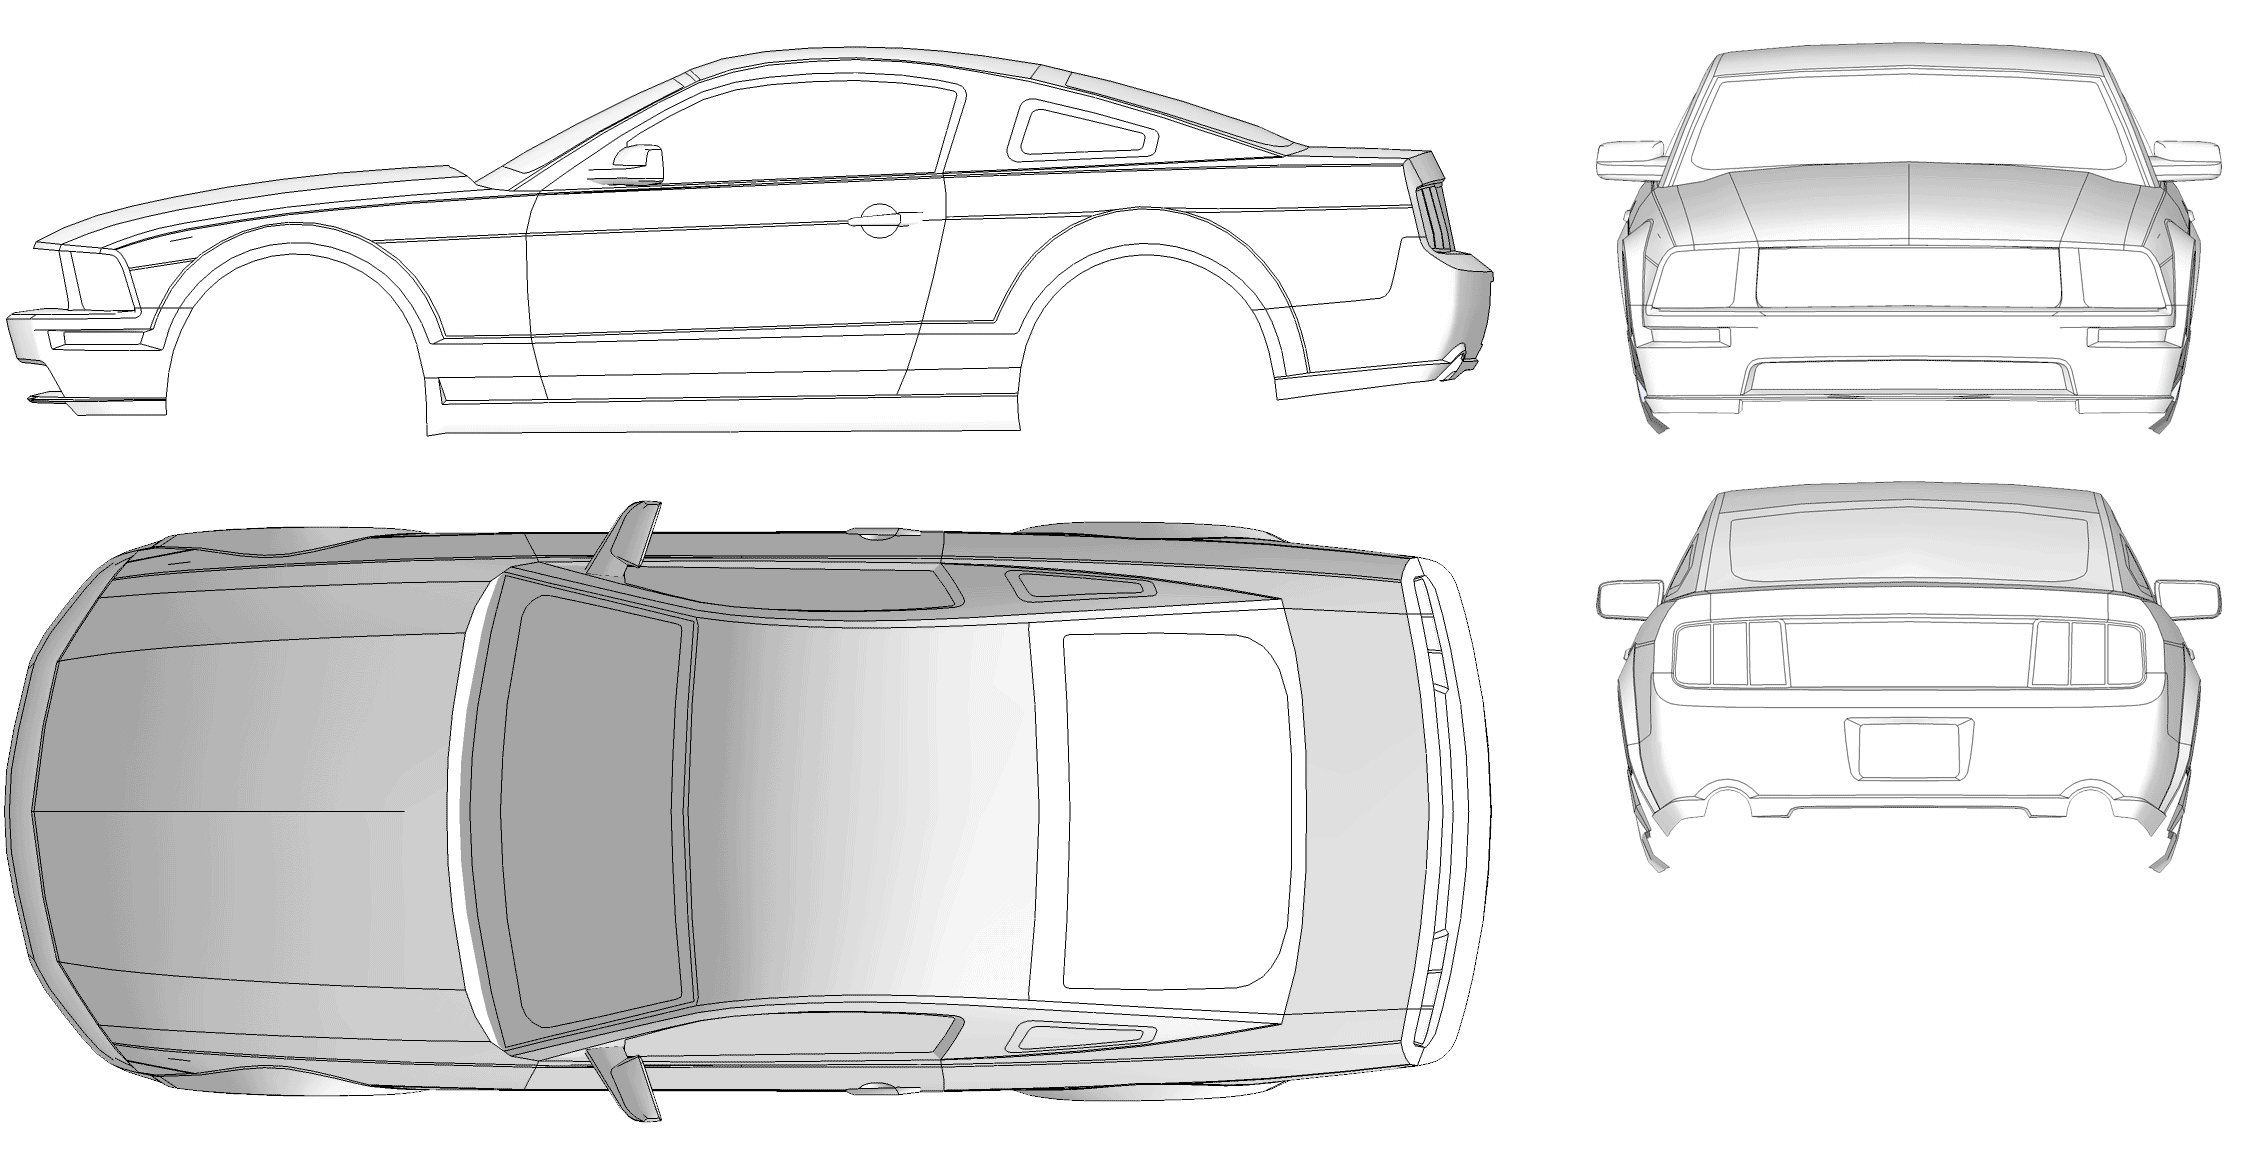 Ford Mustang 2005 Blueprint